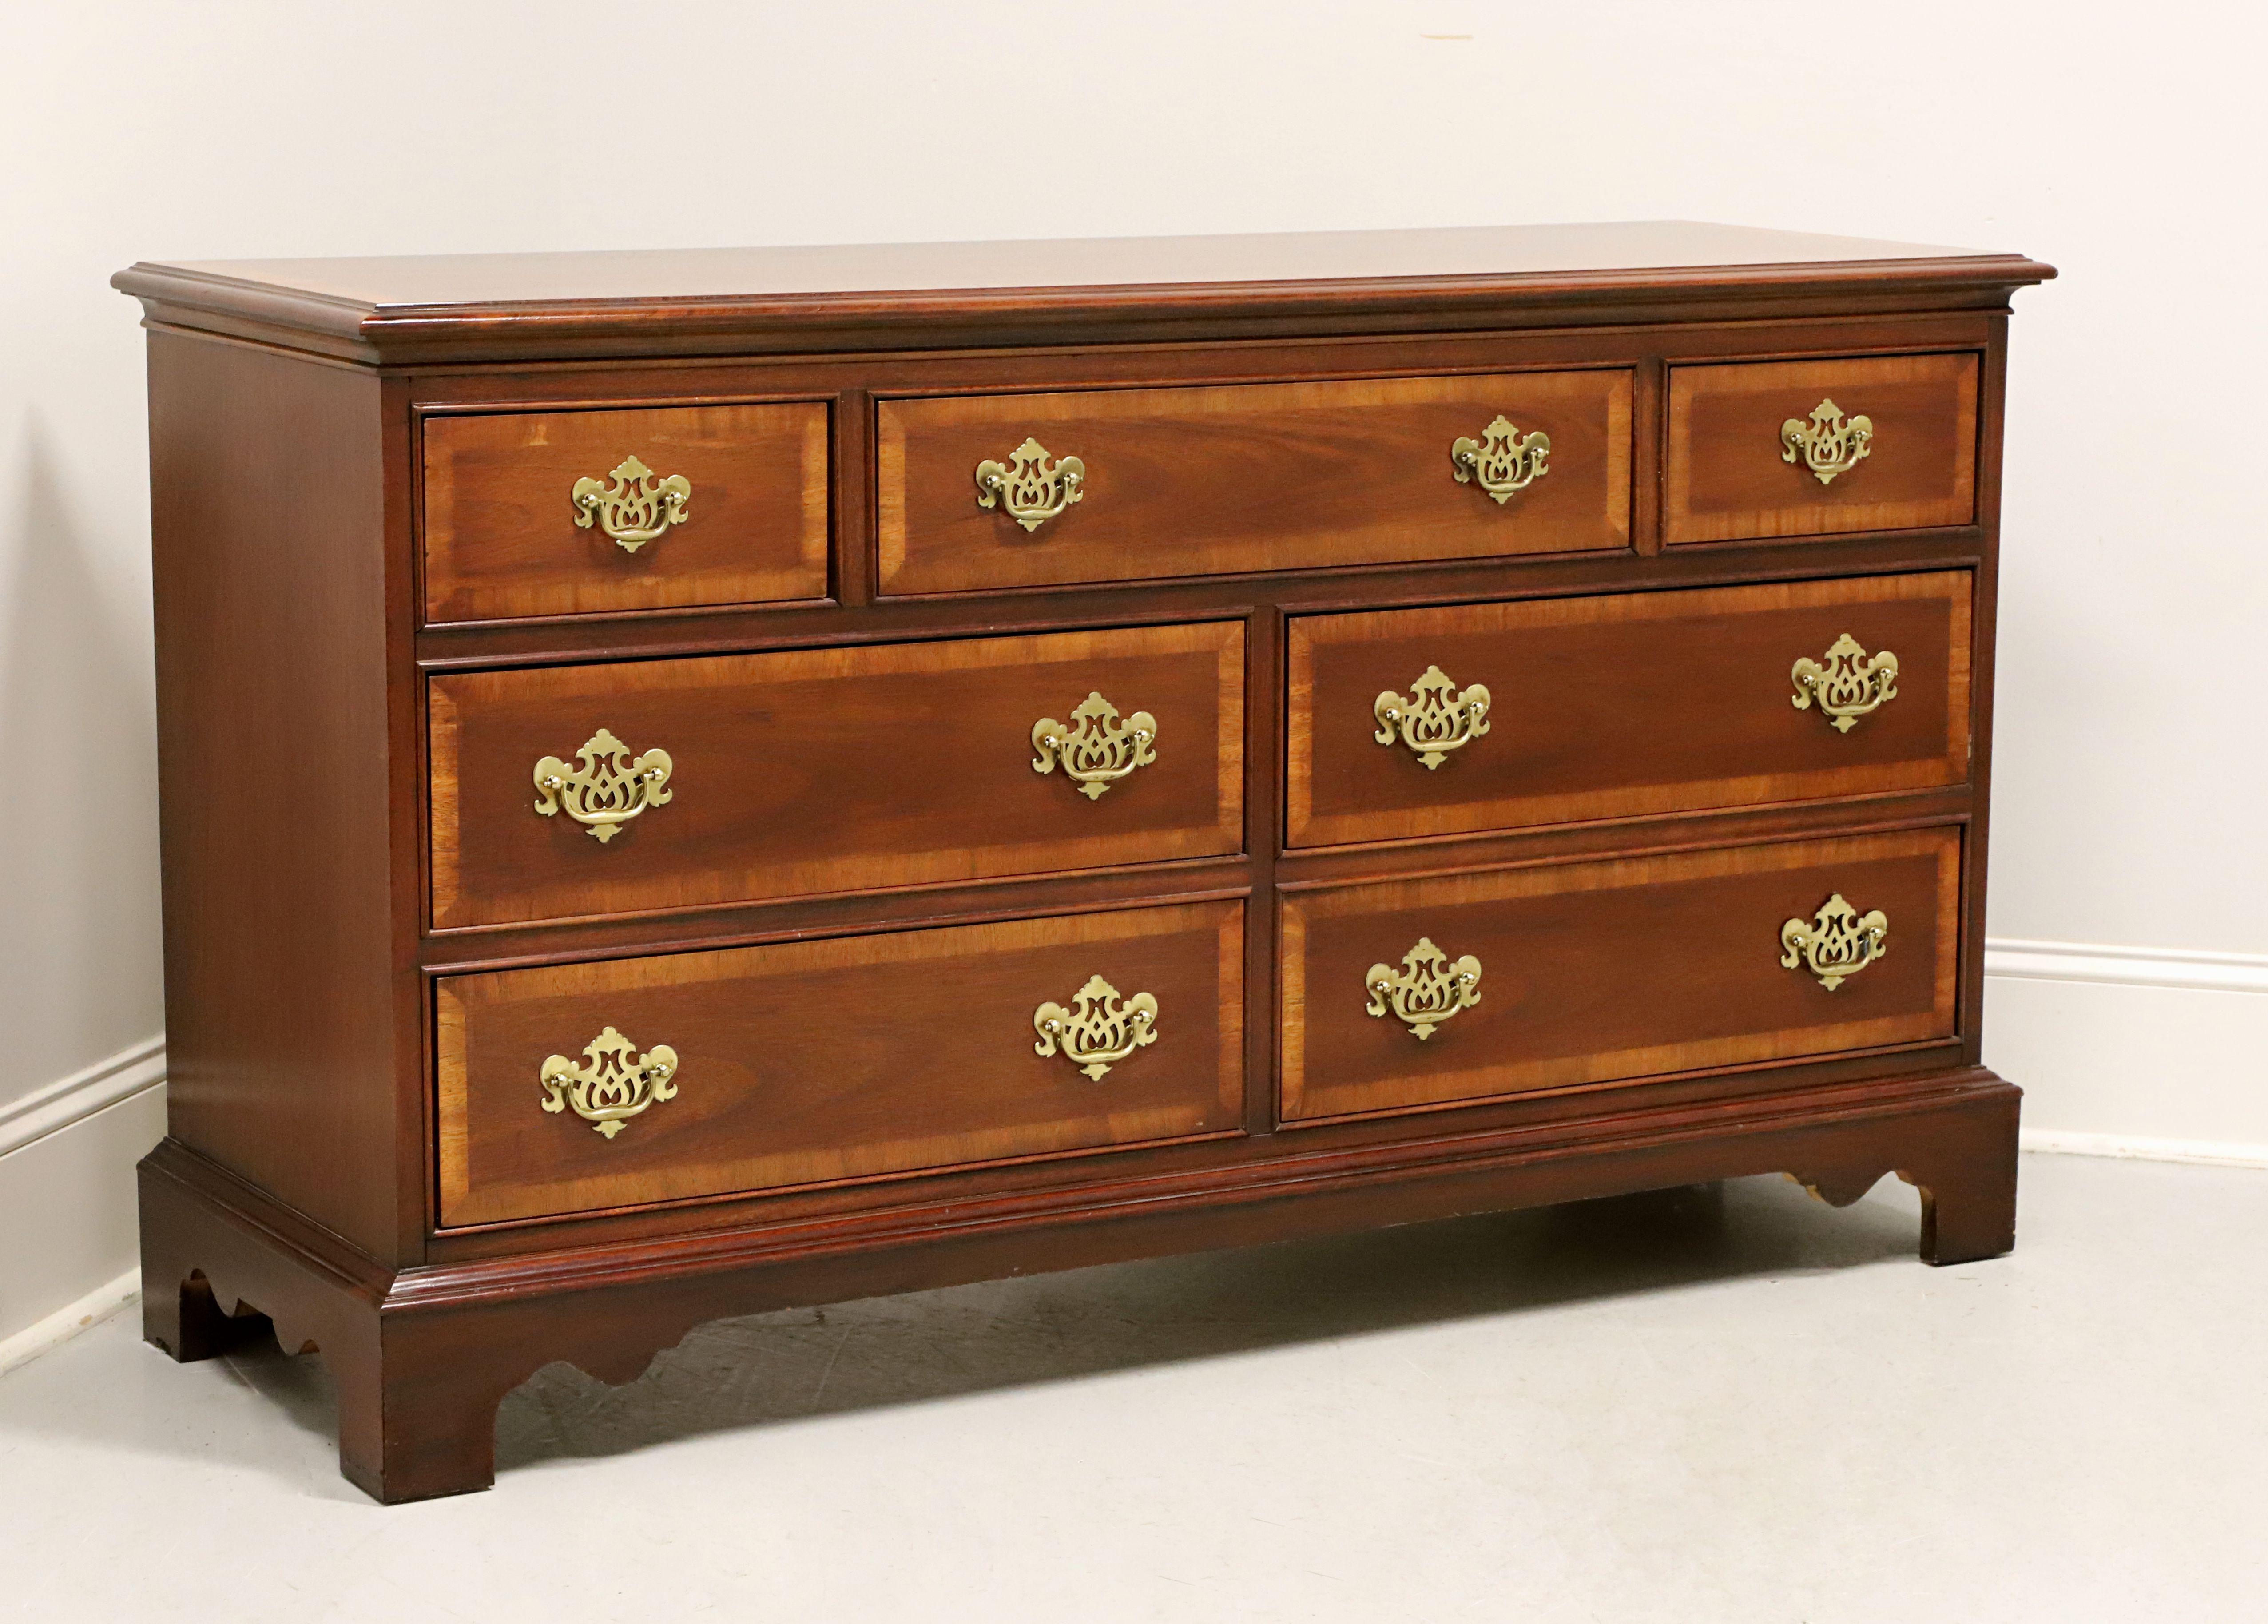 DIXIE Banded Mahogany Chippendale Triple Dresser 7